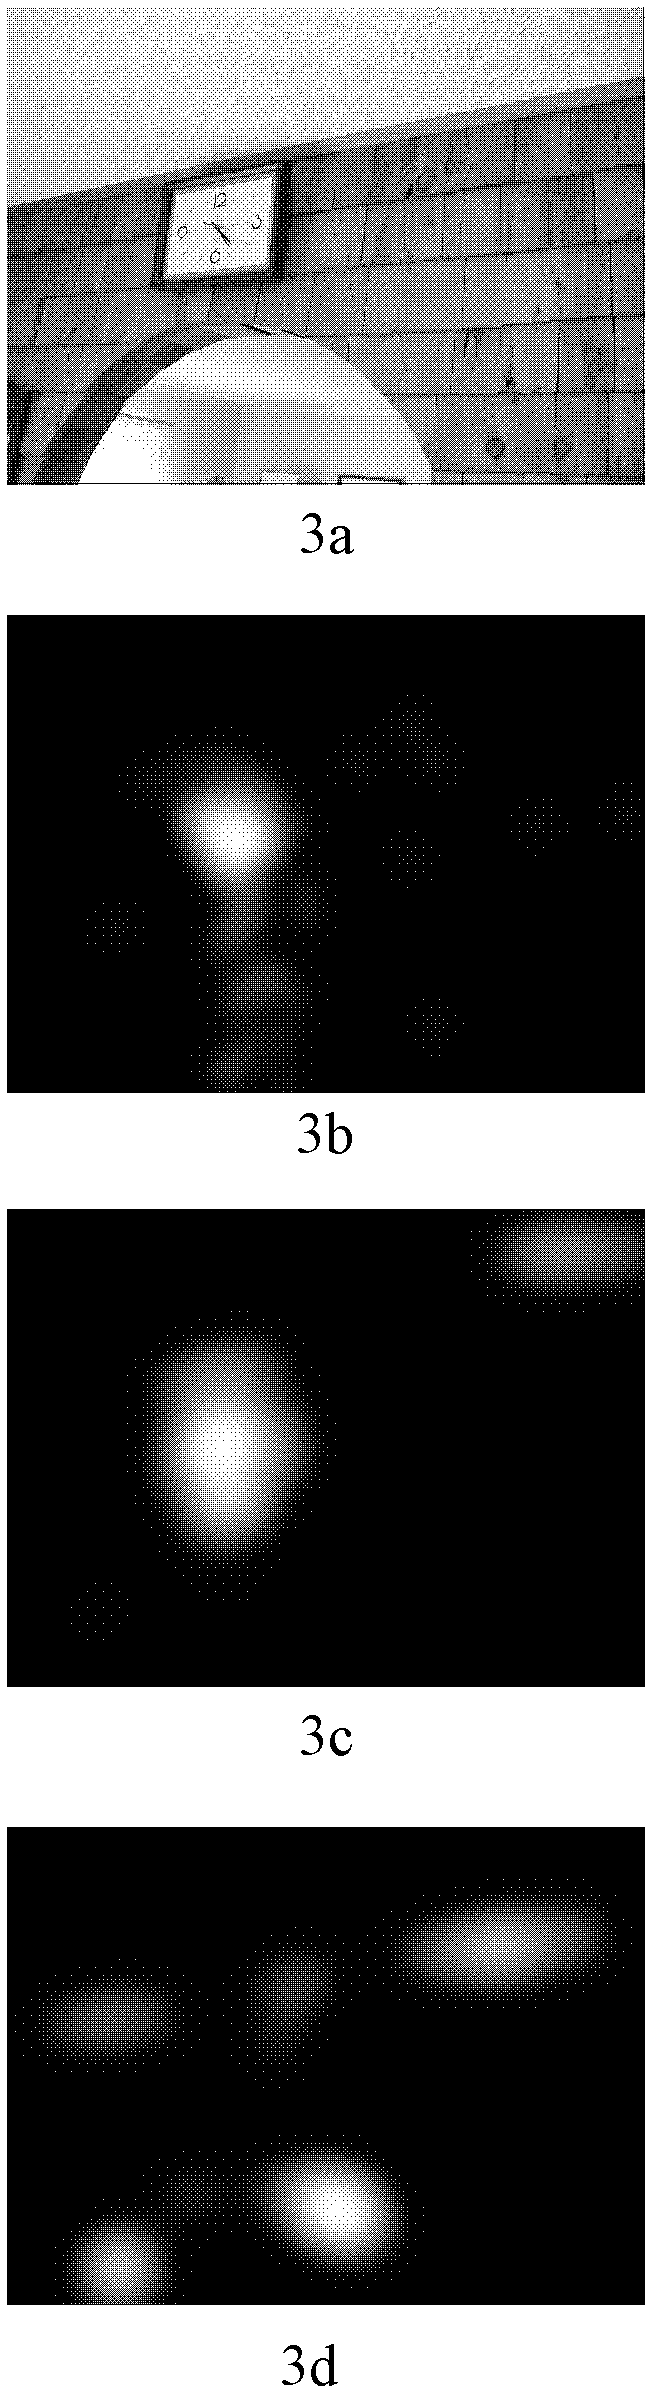 Symmetry property-based method for detecting salient regions of images